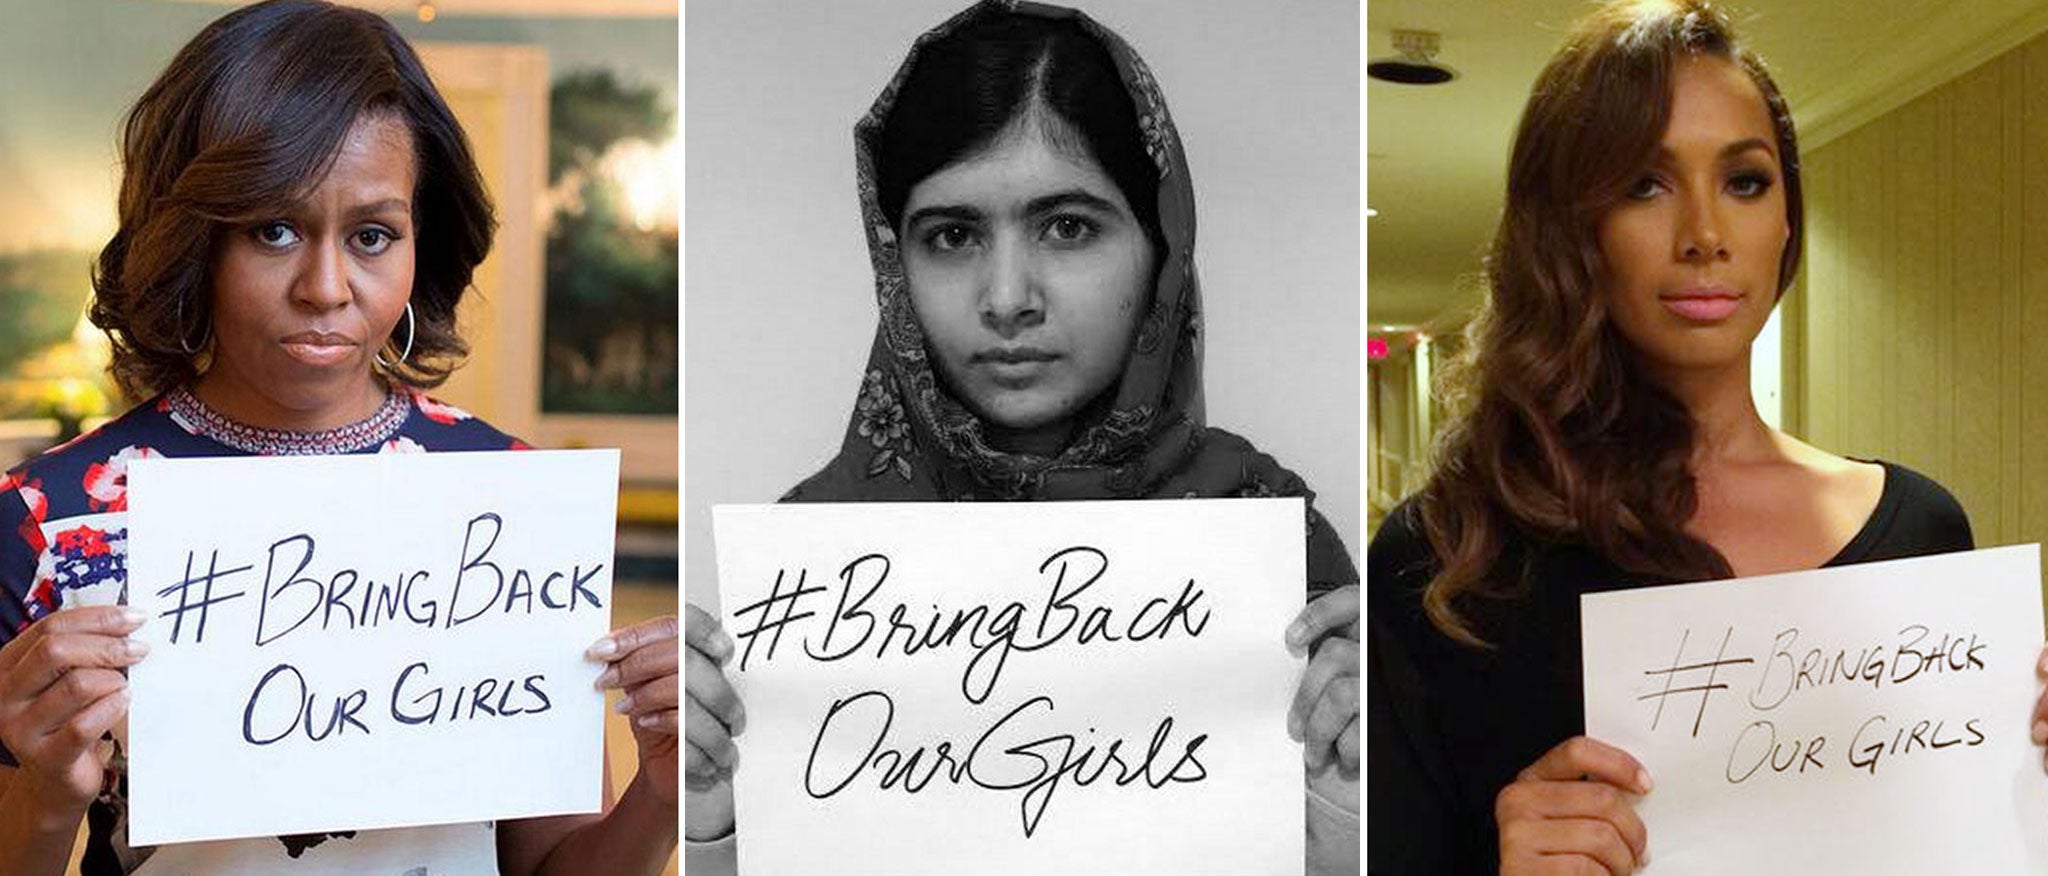 From left to right: Michelle Obama, Malala Yousafzai and Leona Lewis posted pictures of themselves holding a sign with the message #BringBackOurGirls